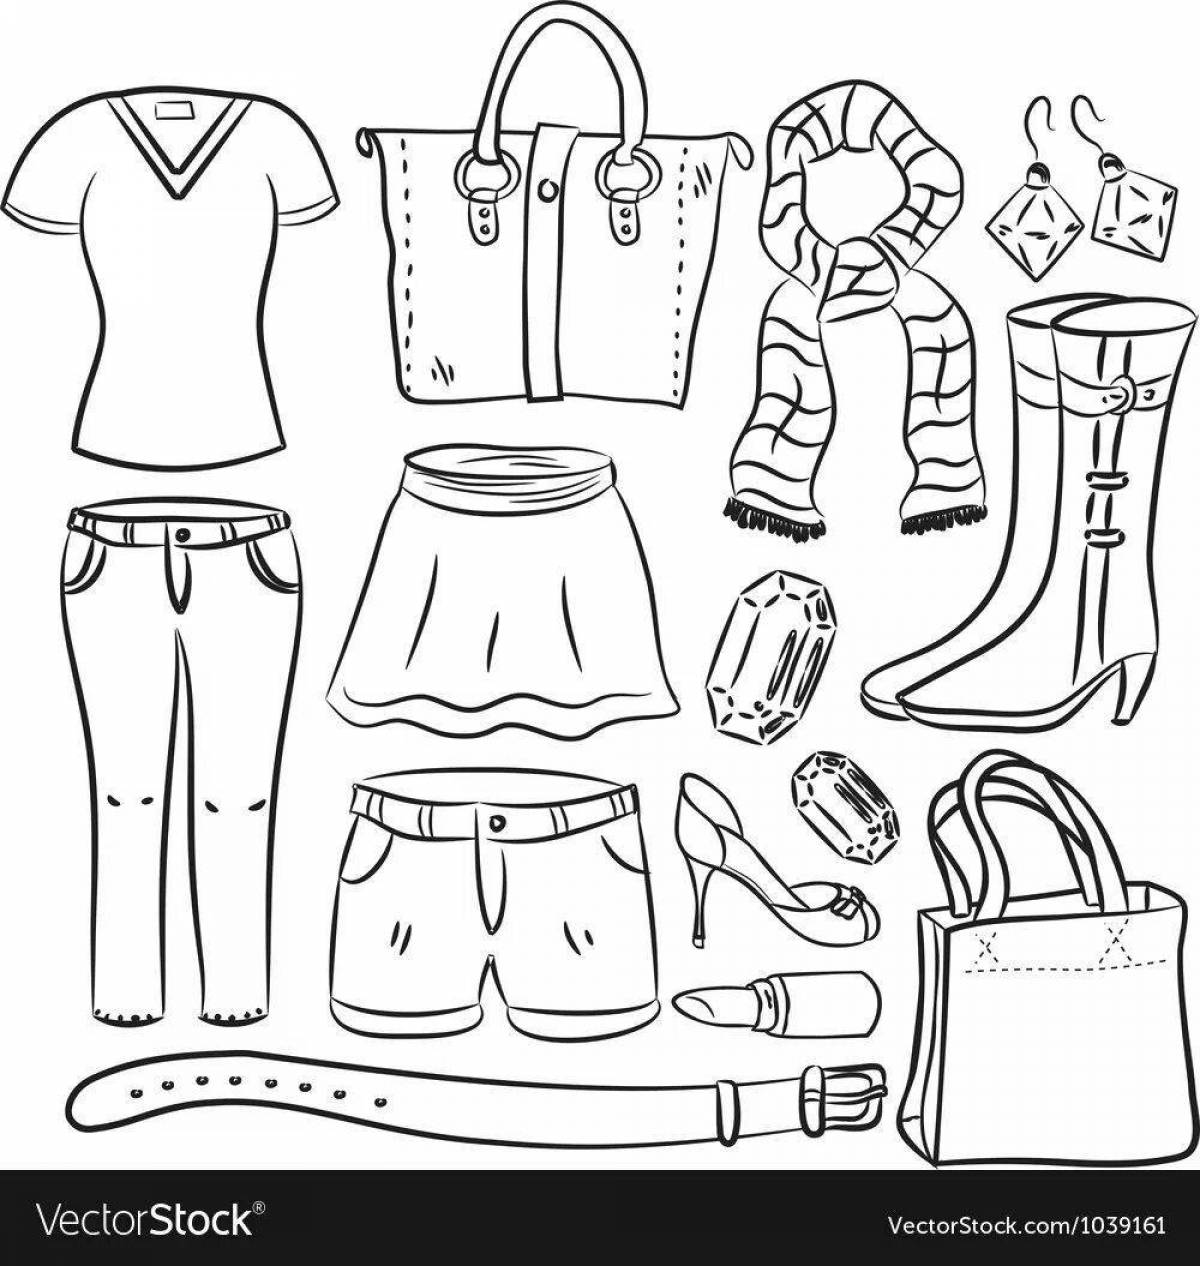 Shopping in color coloring page